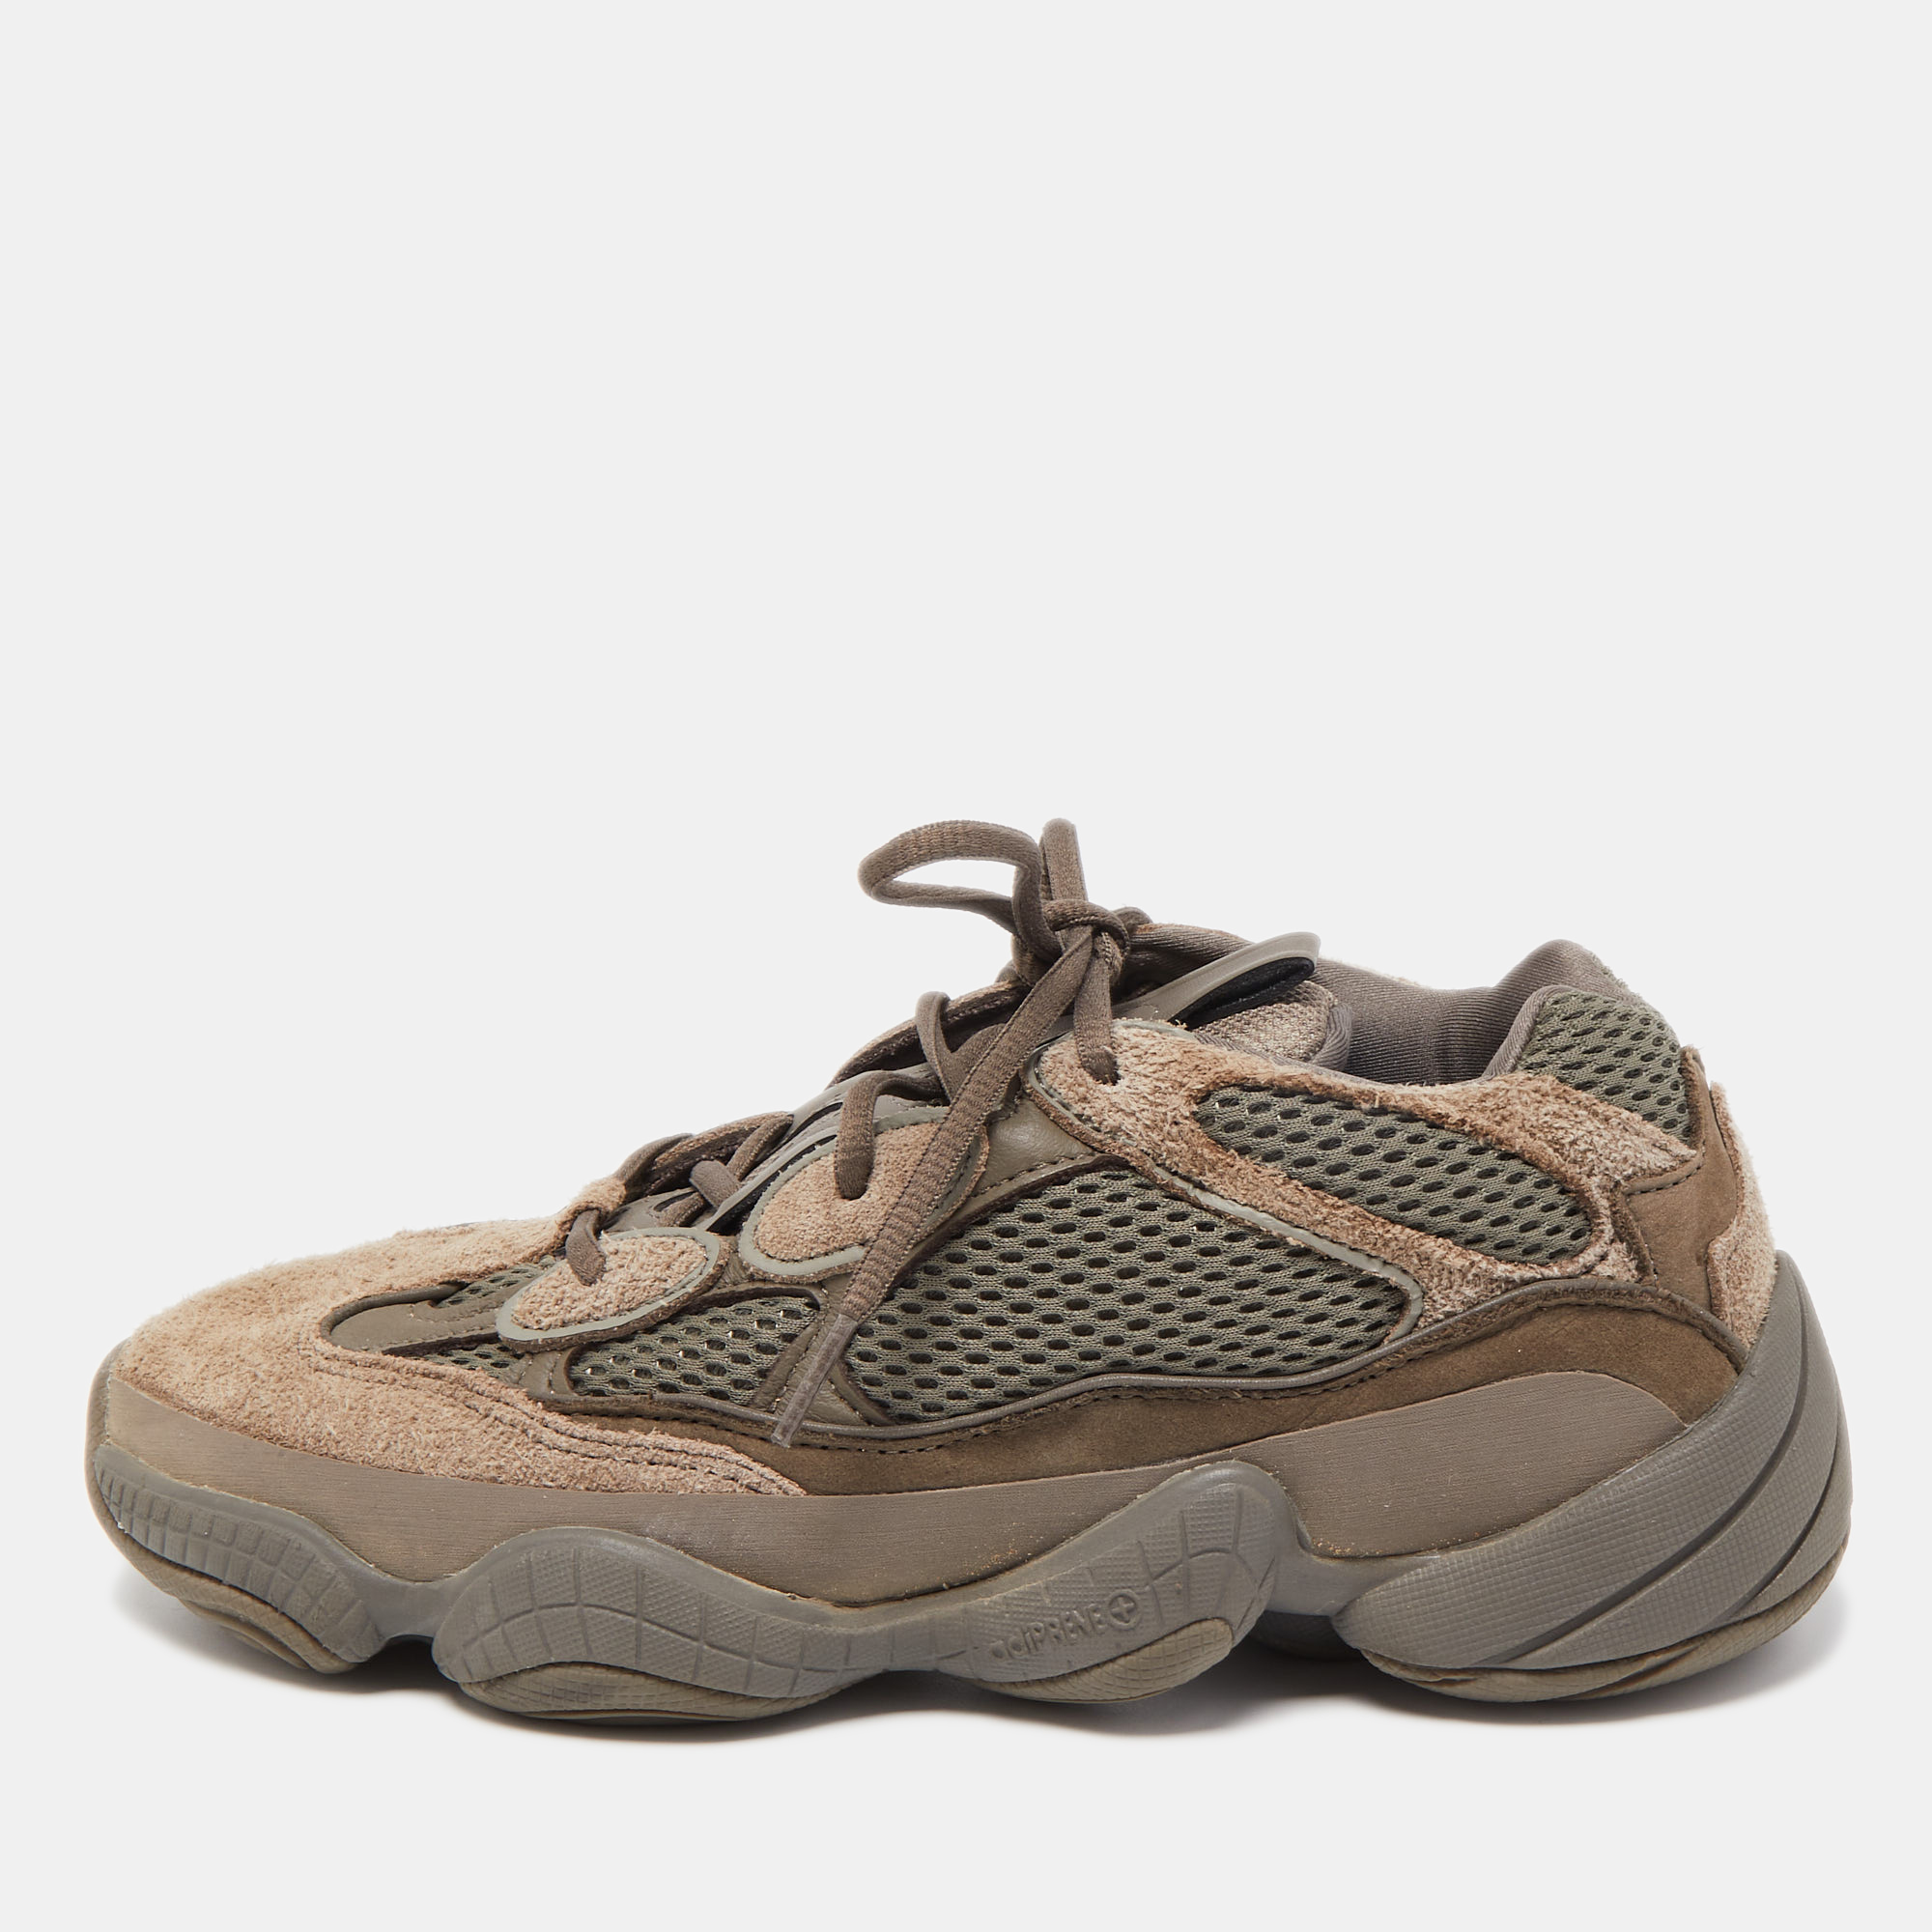 

Yeezy x Adidas Brown Suede and Mesh Yeezy 500 Clay Sneakers Size 40 2/3